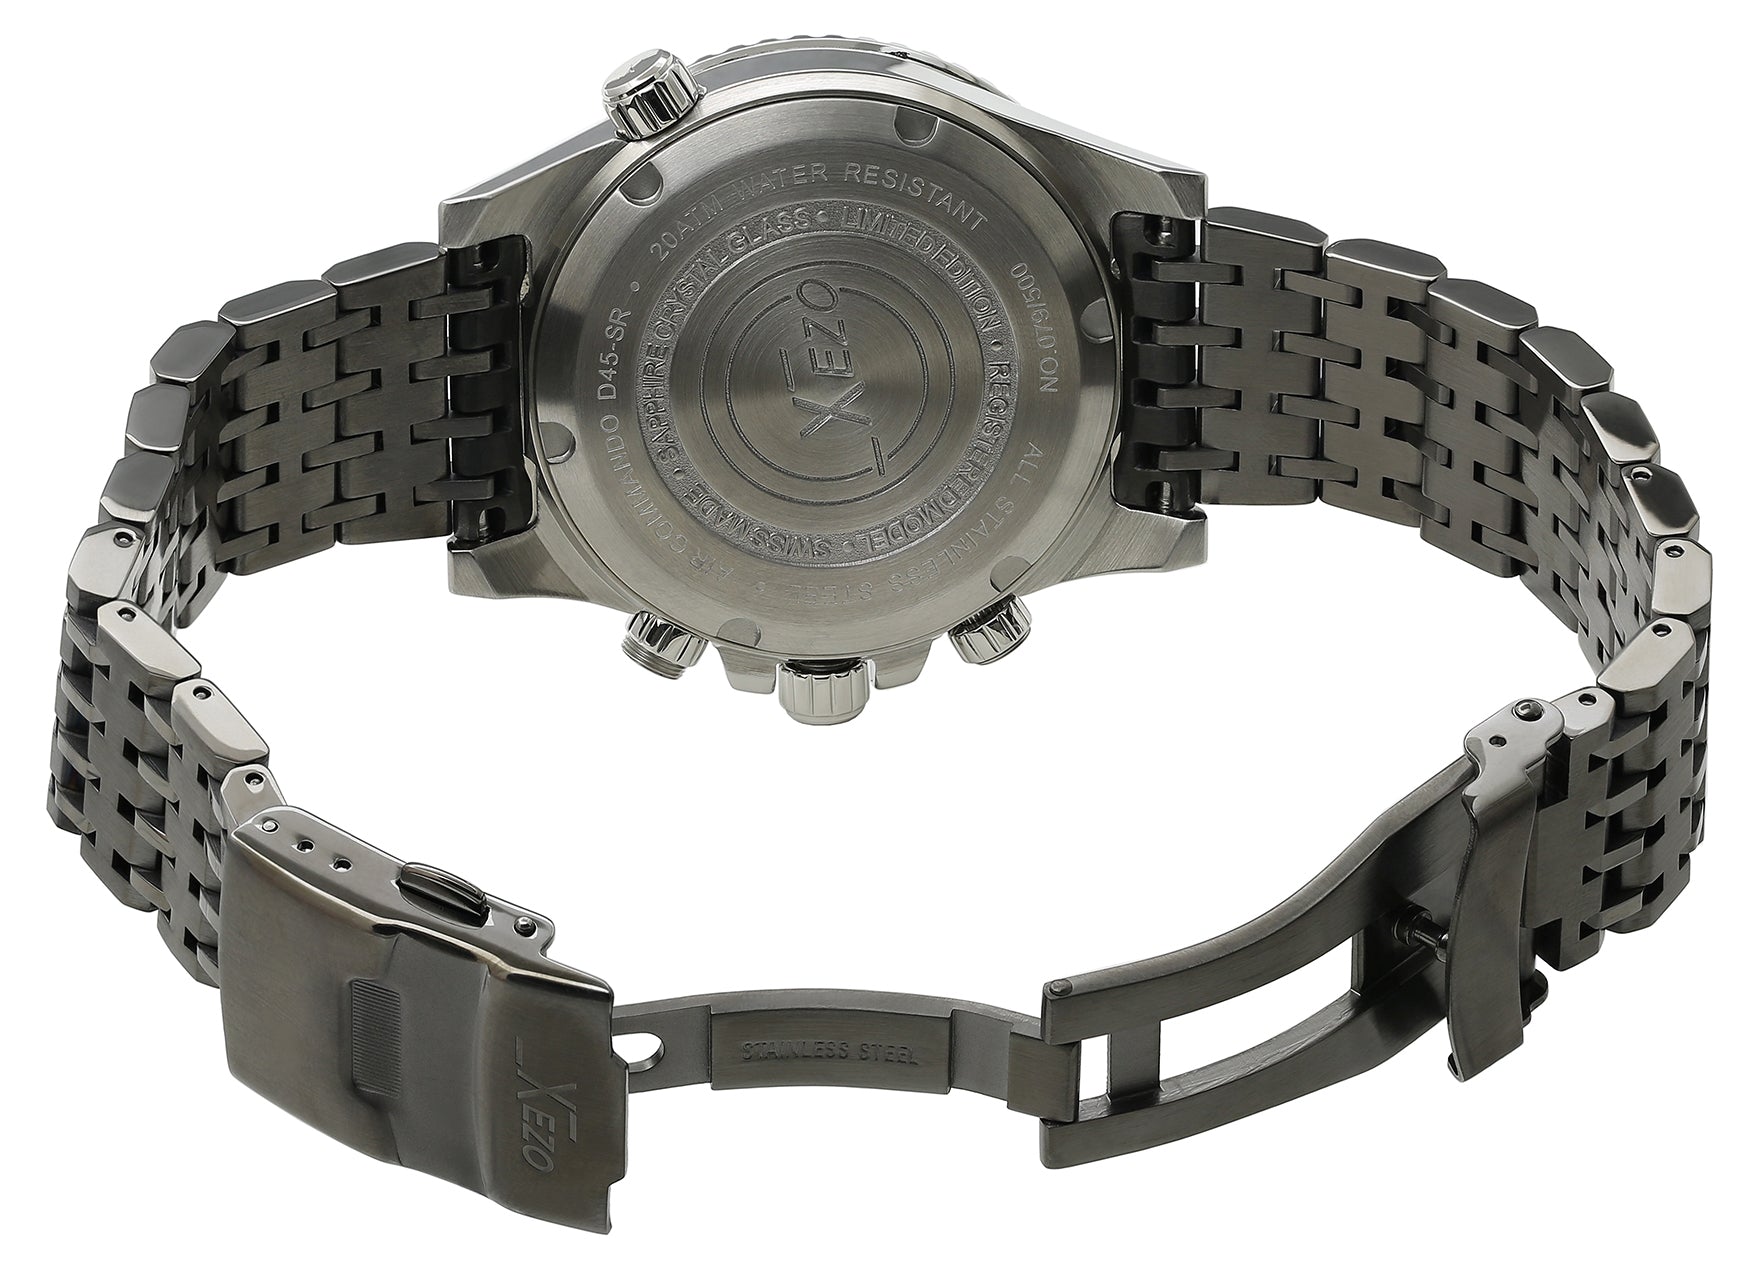 Xezo - Overview of the back of the Air Commando D45-SR watch